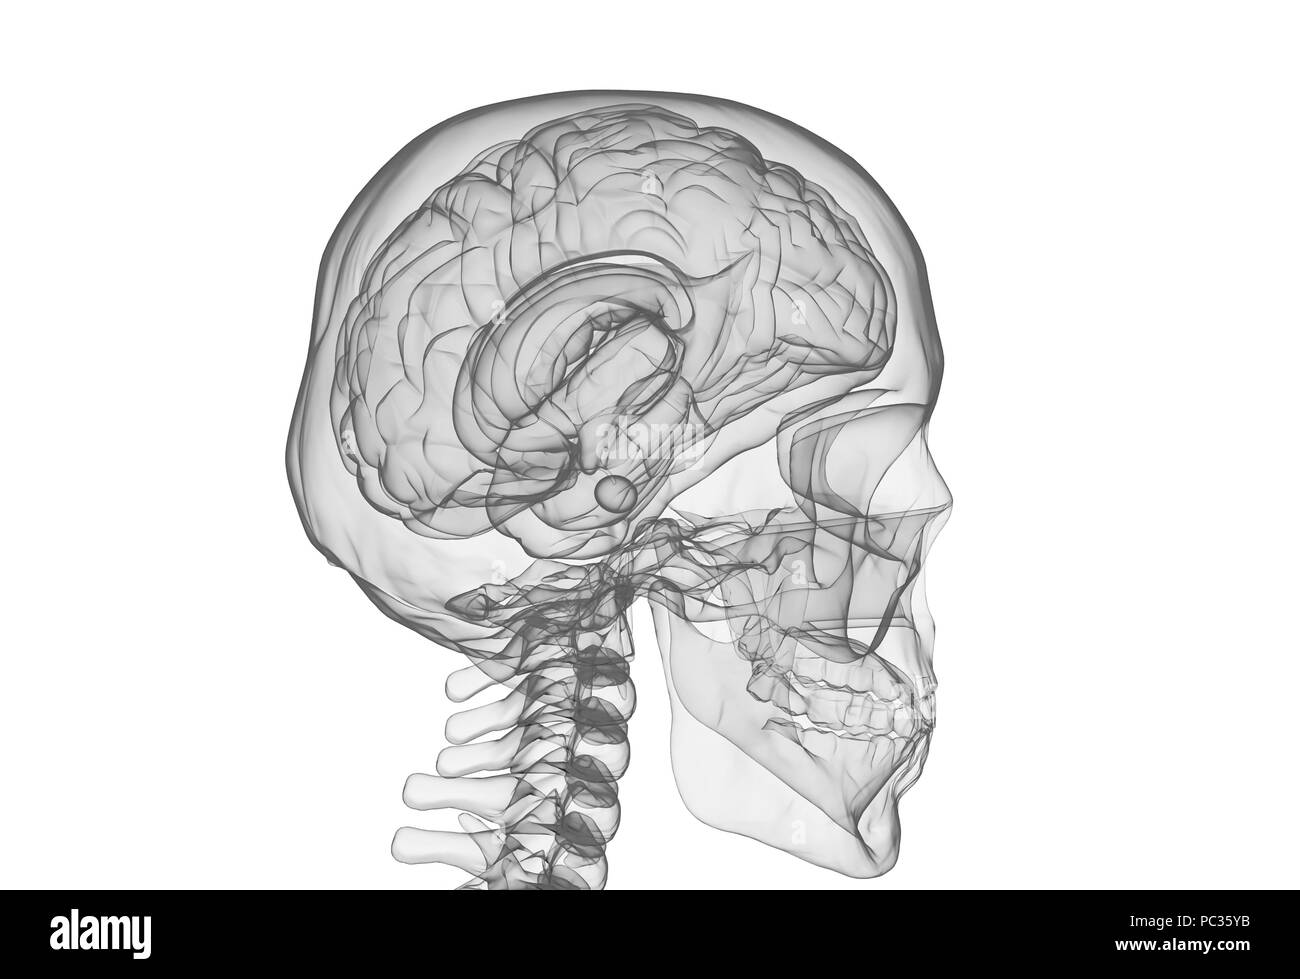 Brain and skull x ray image isolated on white Stock Photo